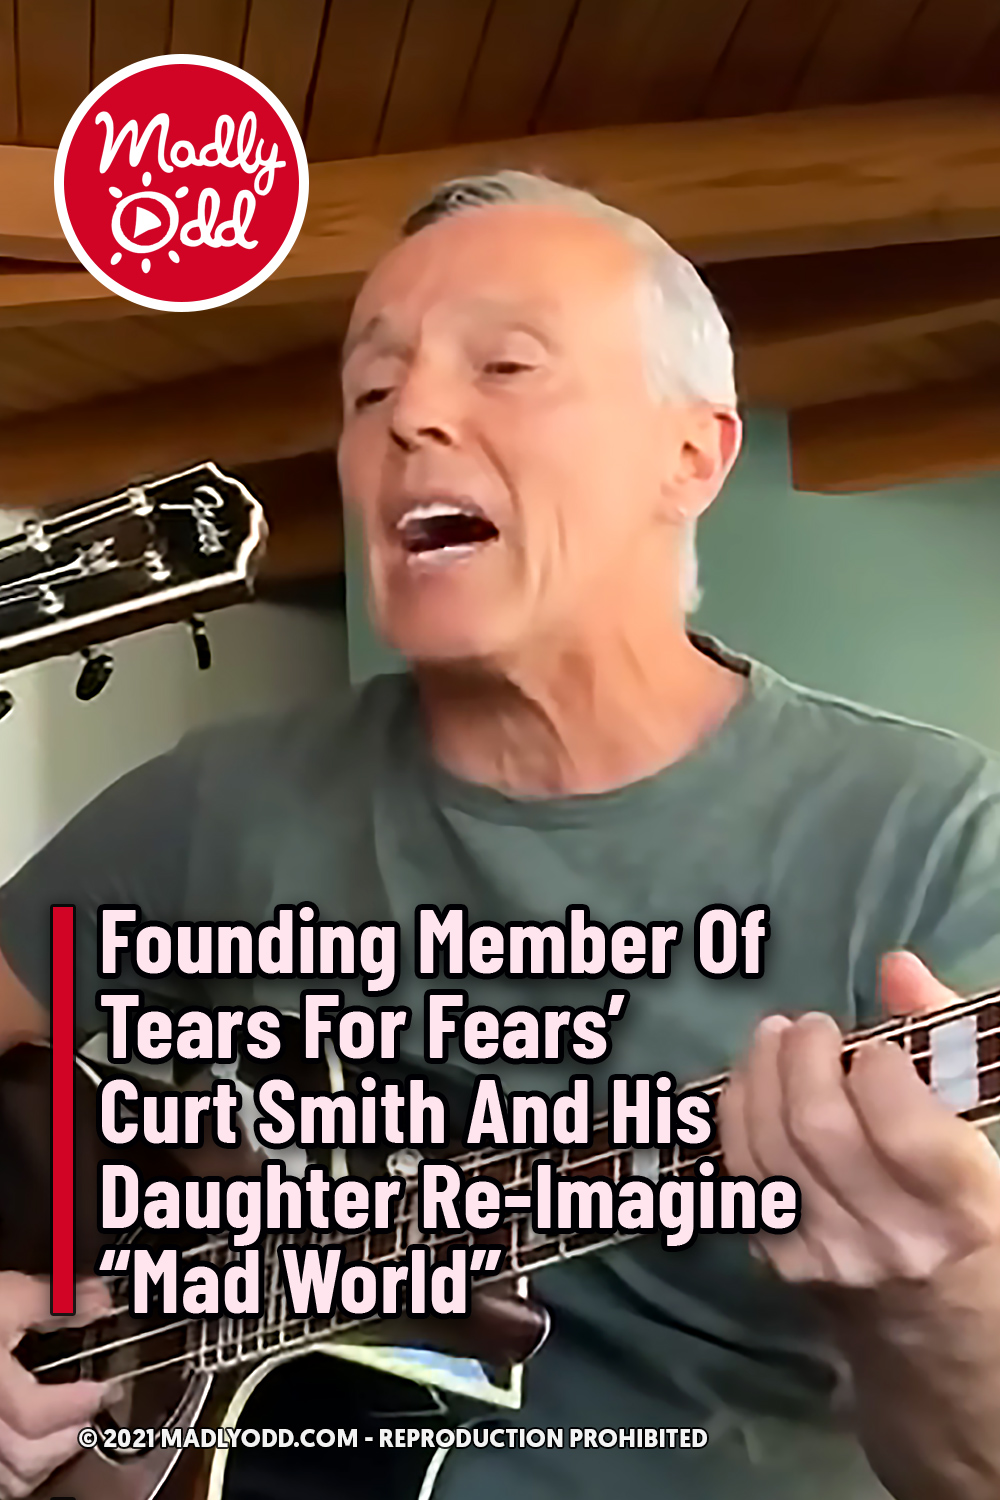 Founding Member Of Tears For Fears’ Curt Smith And His Daughter Re-Imagine “Mad World”